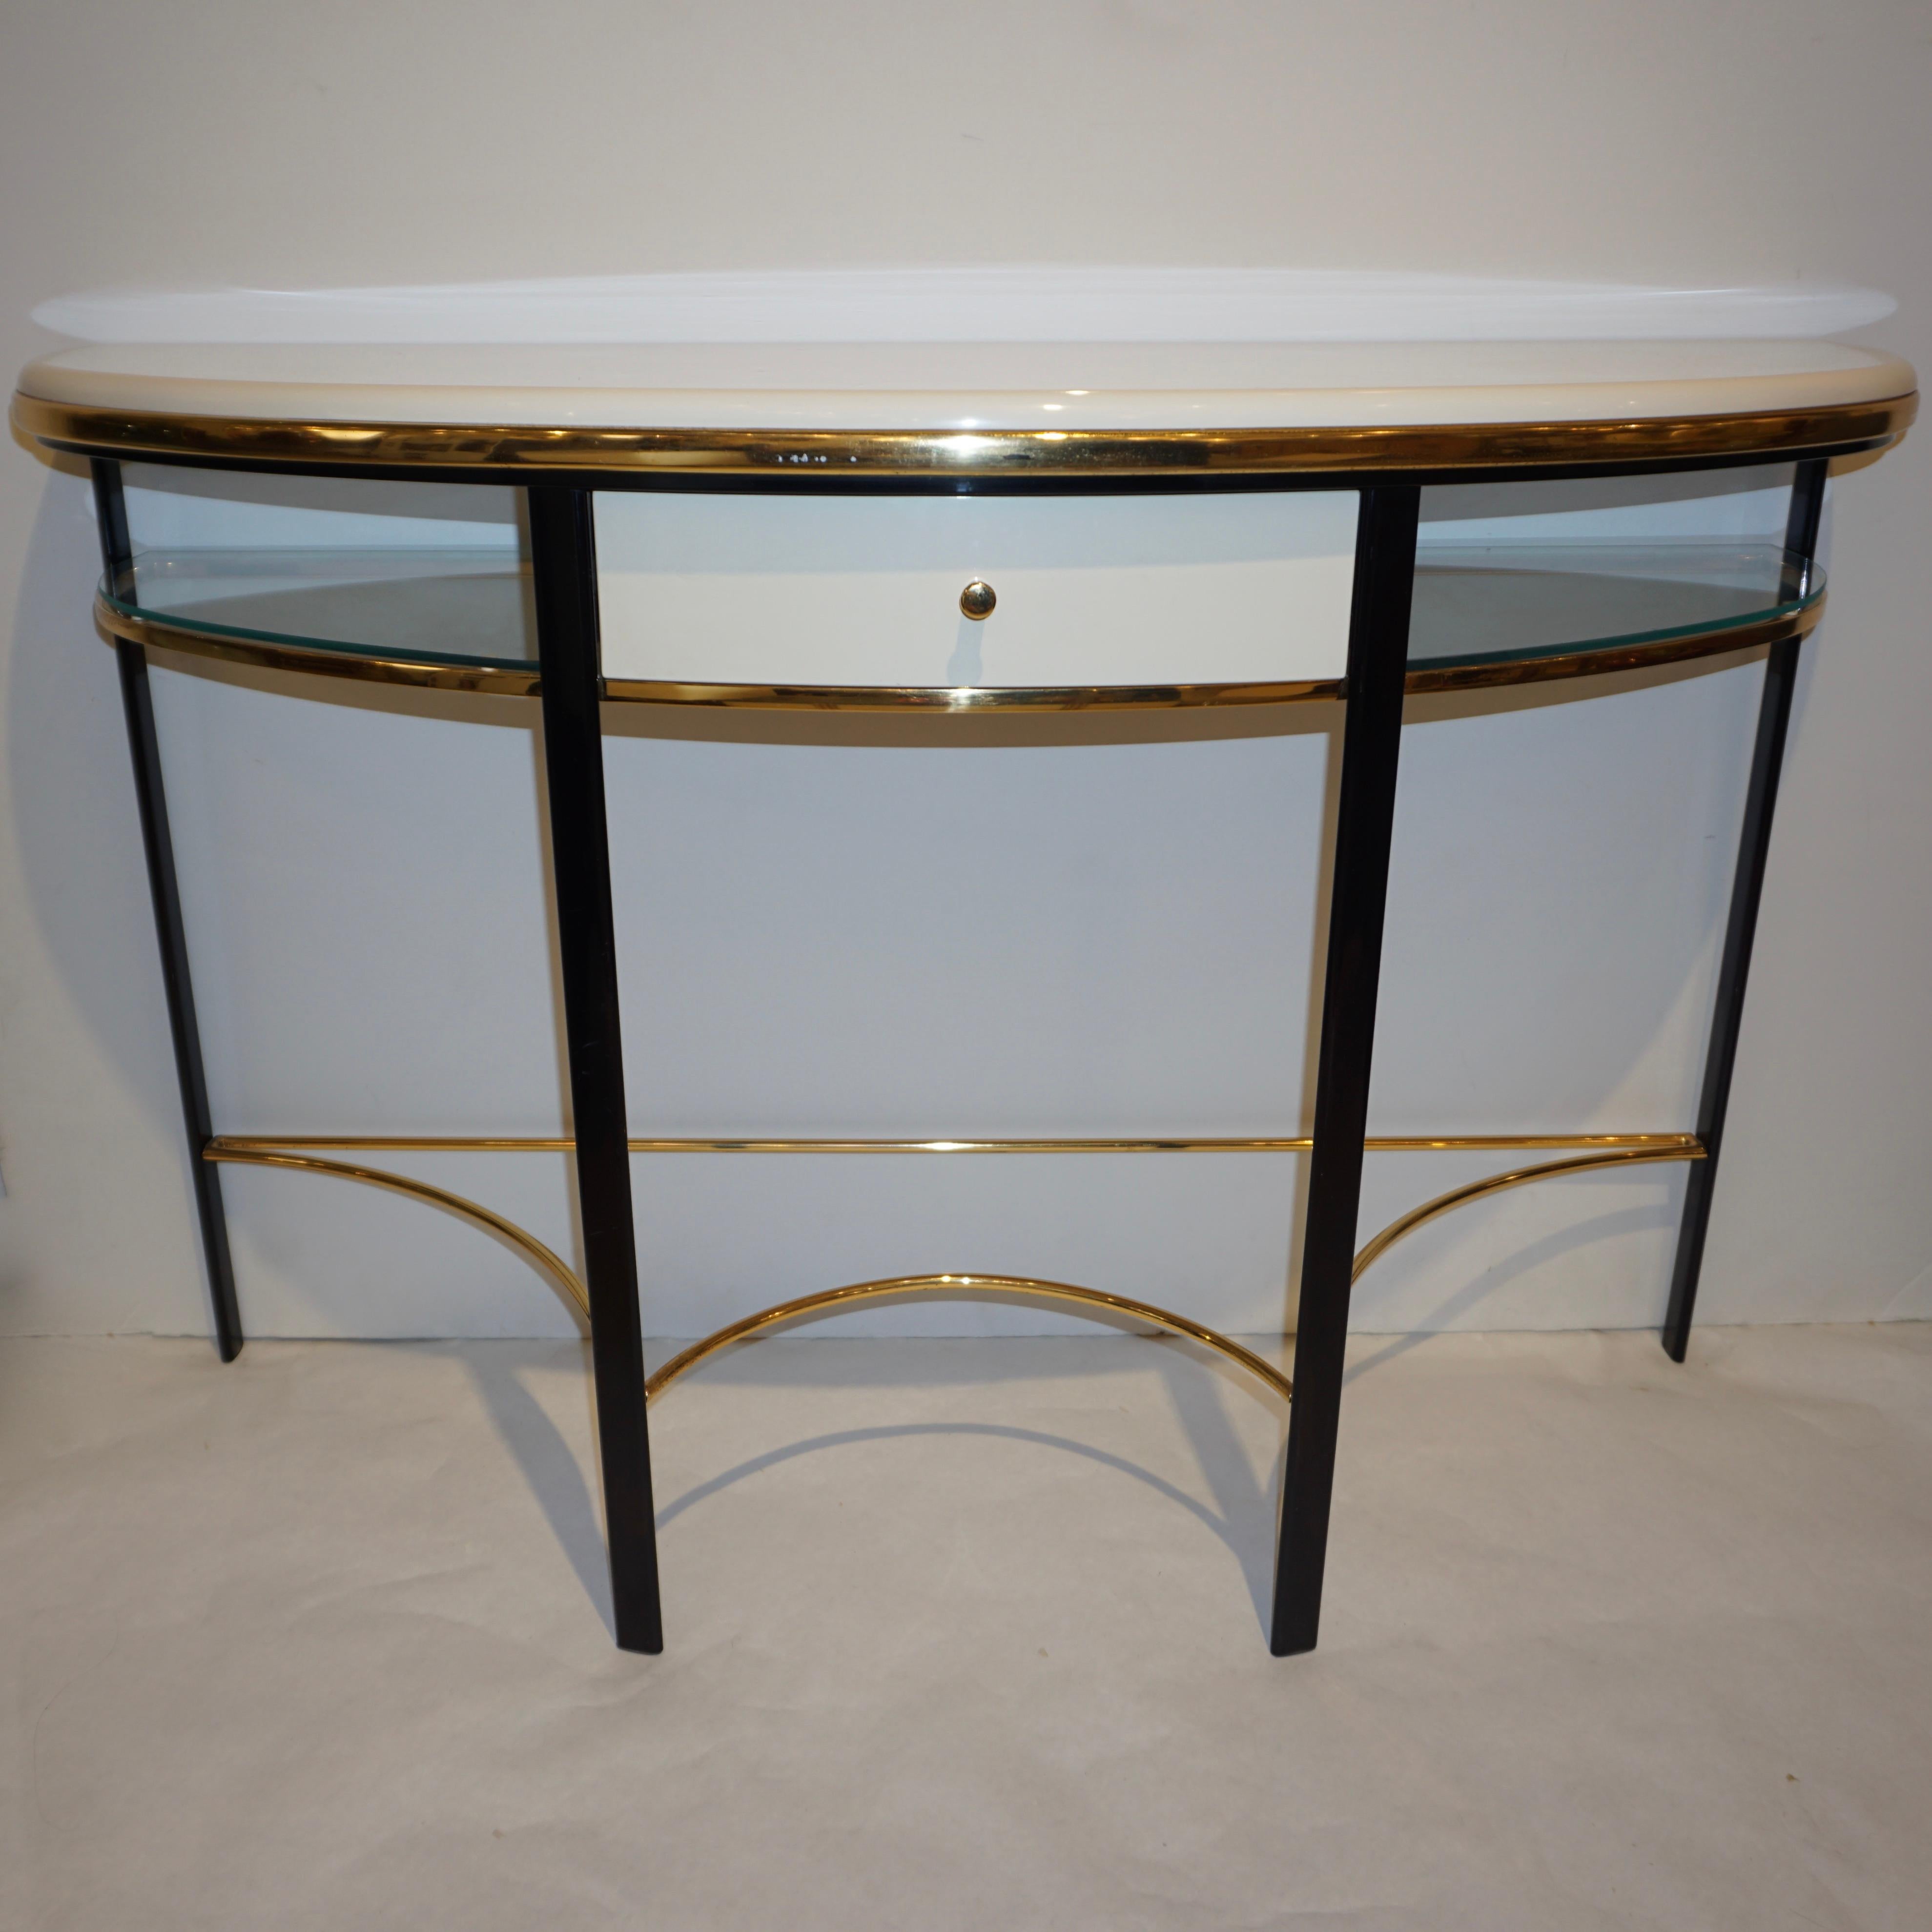 Hand-Crafted 1970s Vintage Italian One-Drawer Black & Cream Lacquered Brass Demi Lune Console